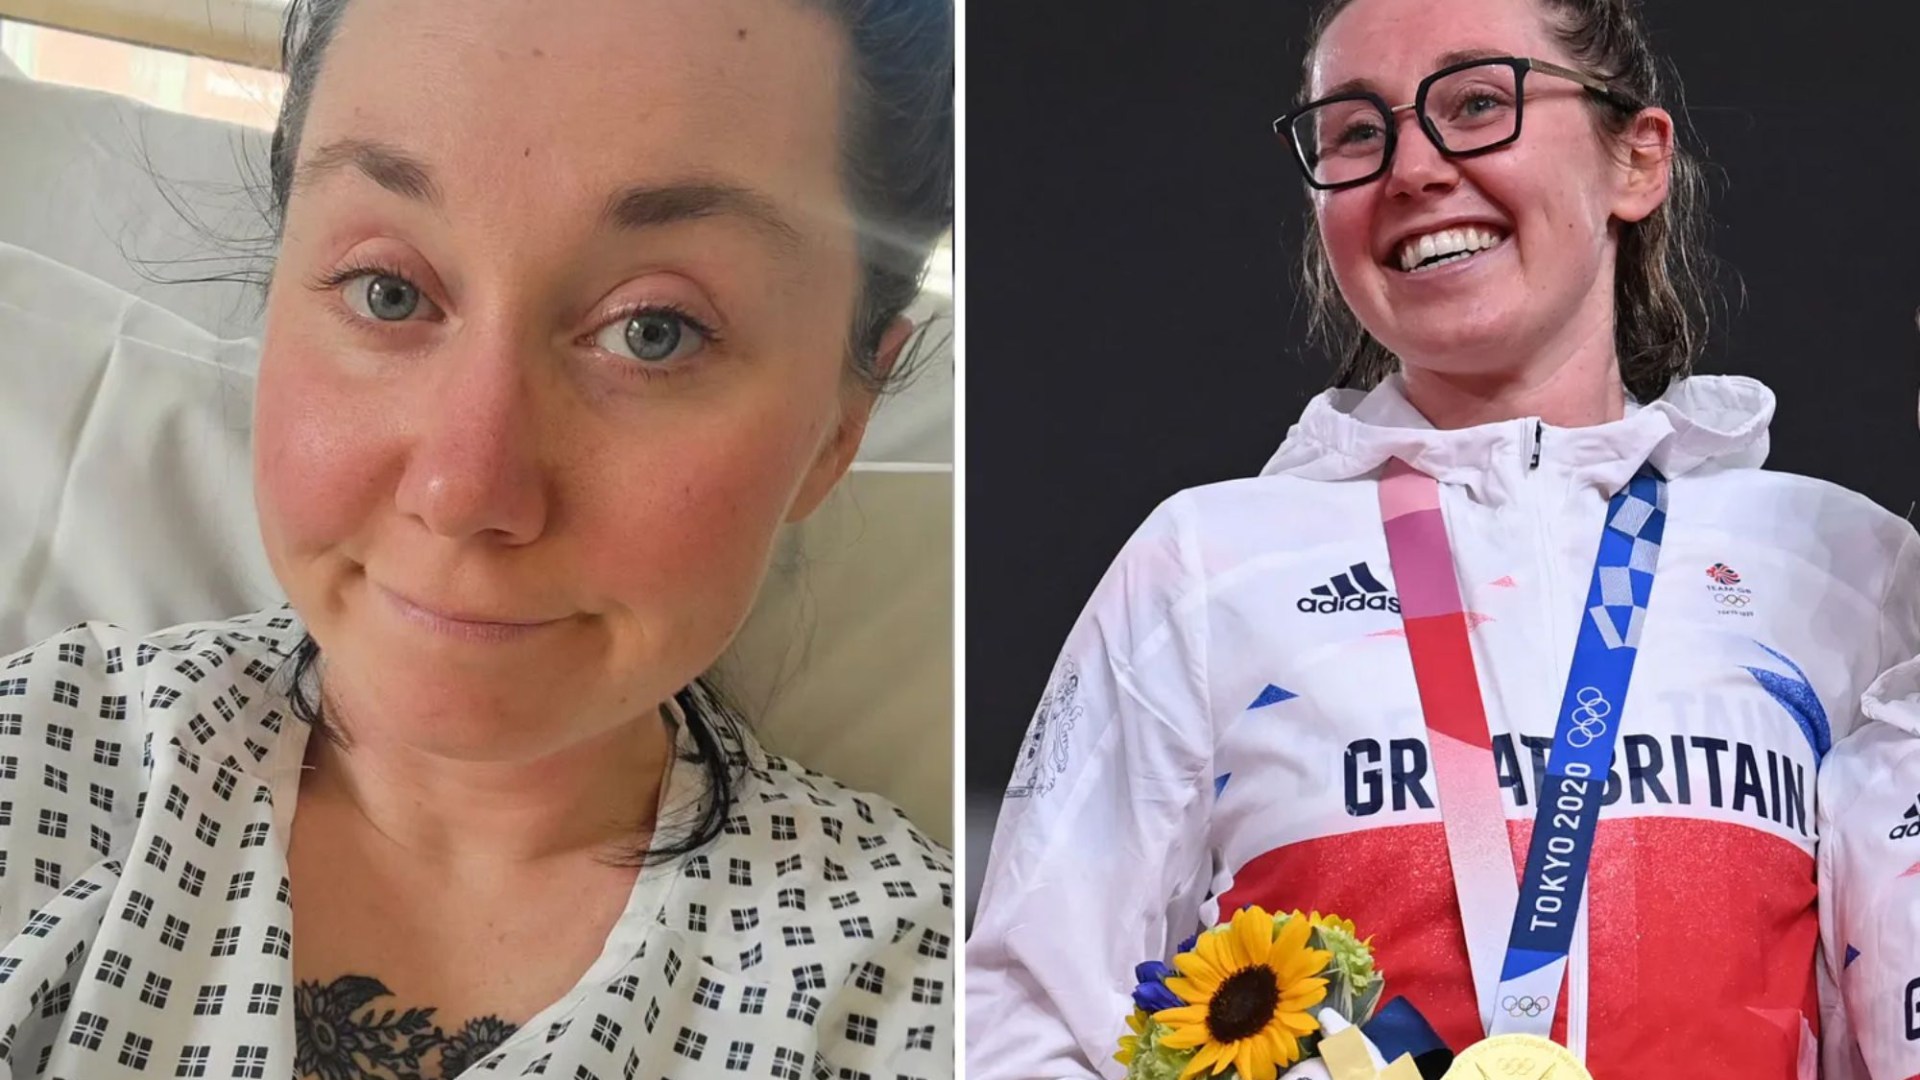 Katie Archibald rushed to hospital after freak accident as Team GB Olympic champion is ruled out of Paris 2024 [Video]